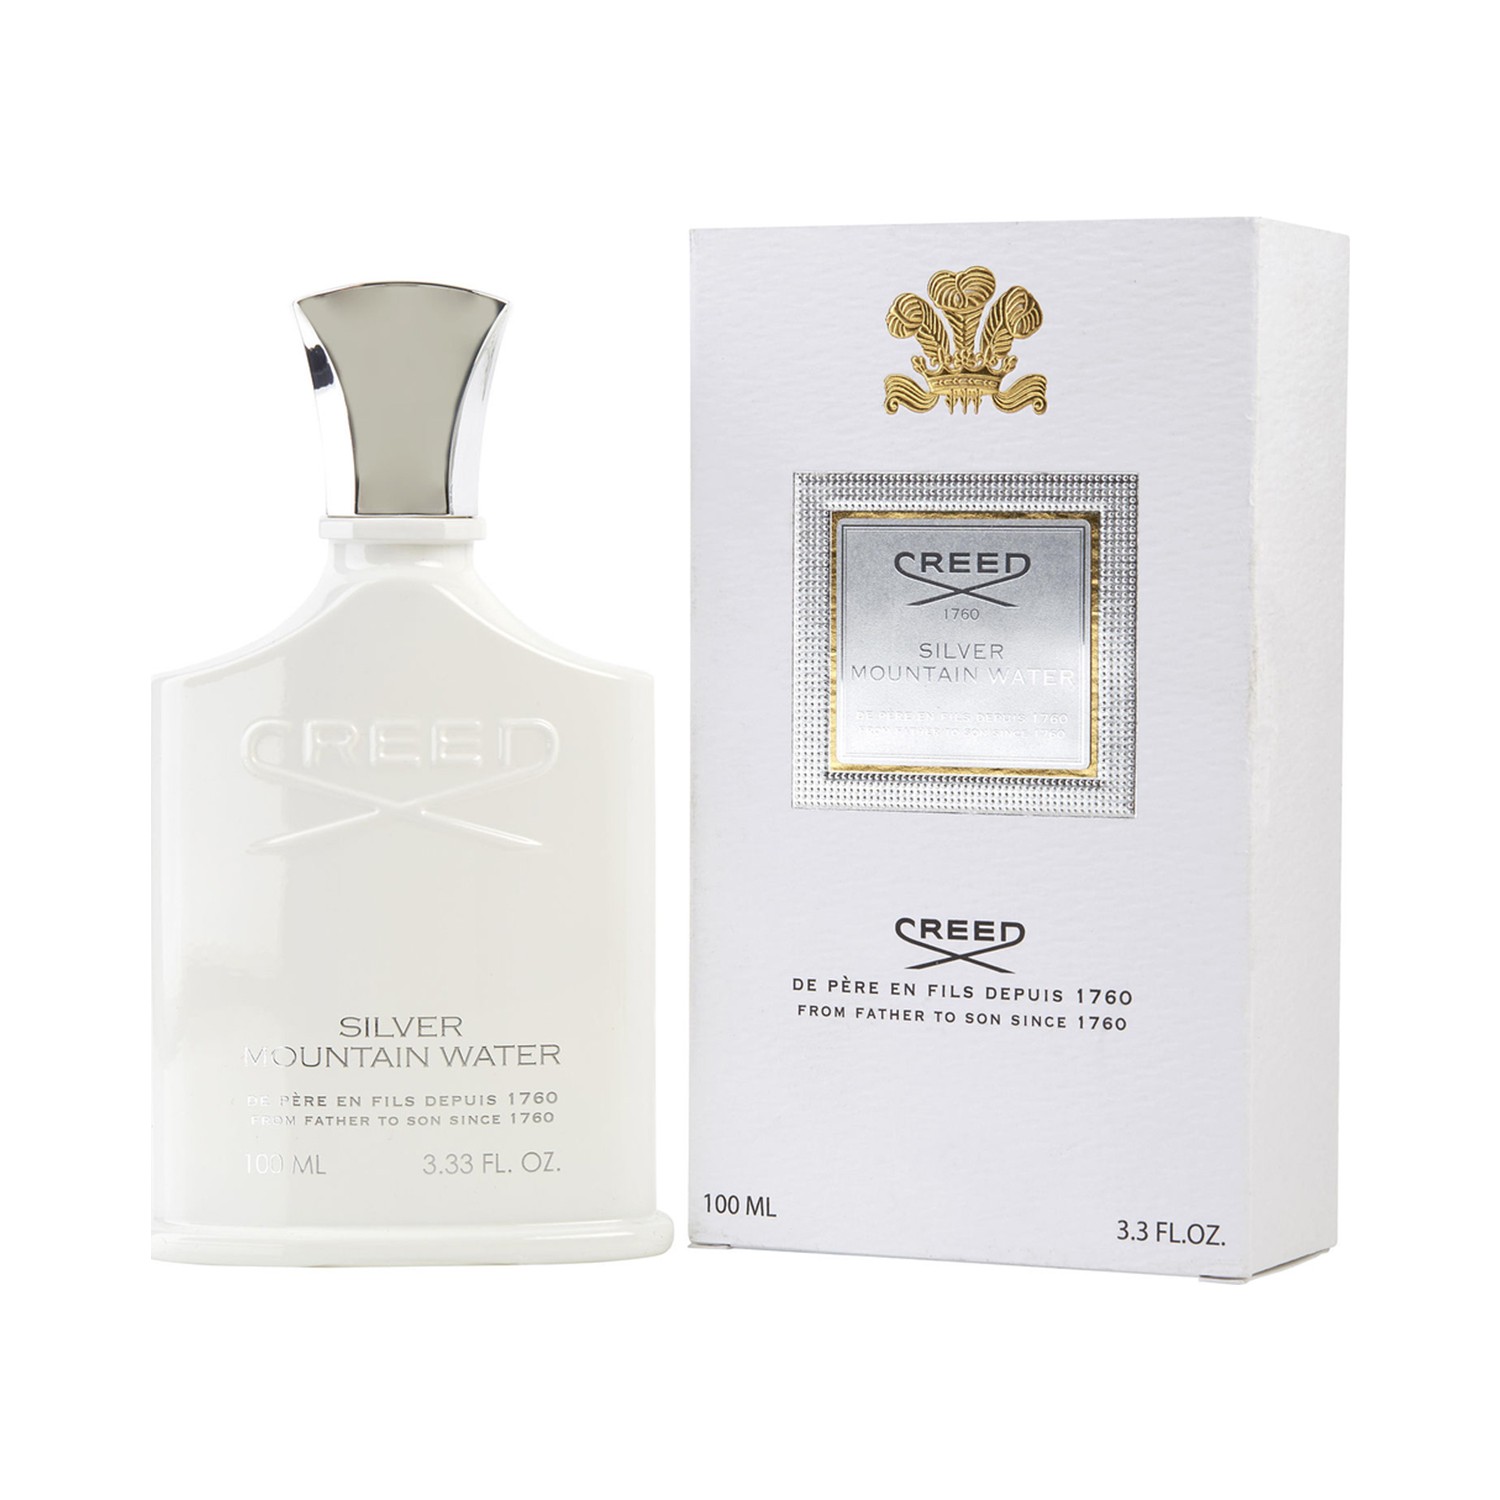 Creed парфюмерная вода silver mountain. Creed Silver Mountain Water 50ml. Silver Mountain (Creed) 100мл. Silver Mountain Water Creed 100 мл. Creed Silver Mountain Water 60 ml.